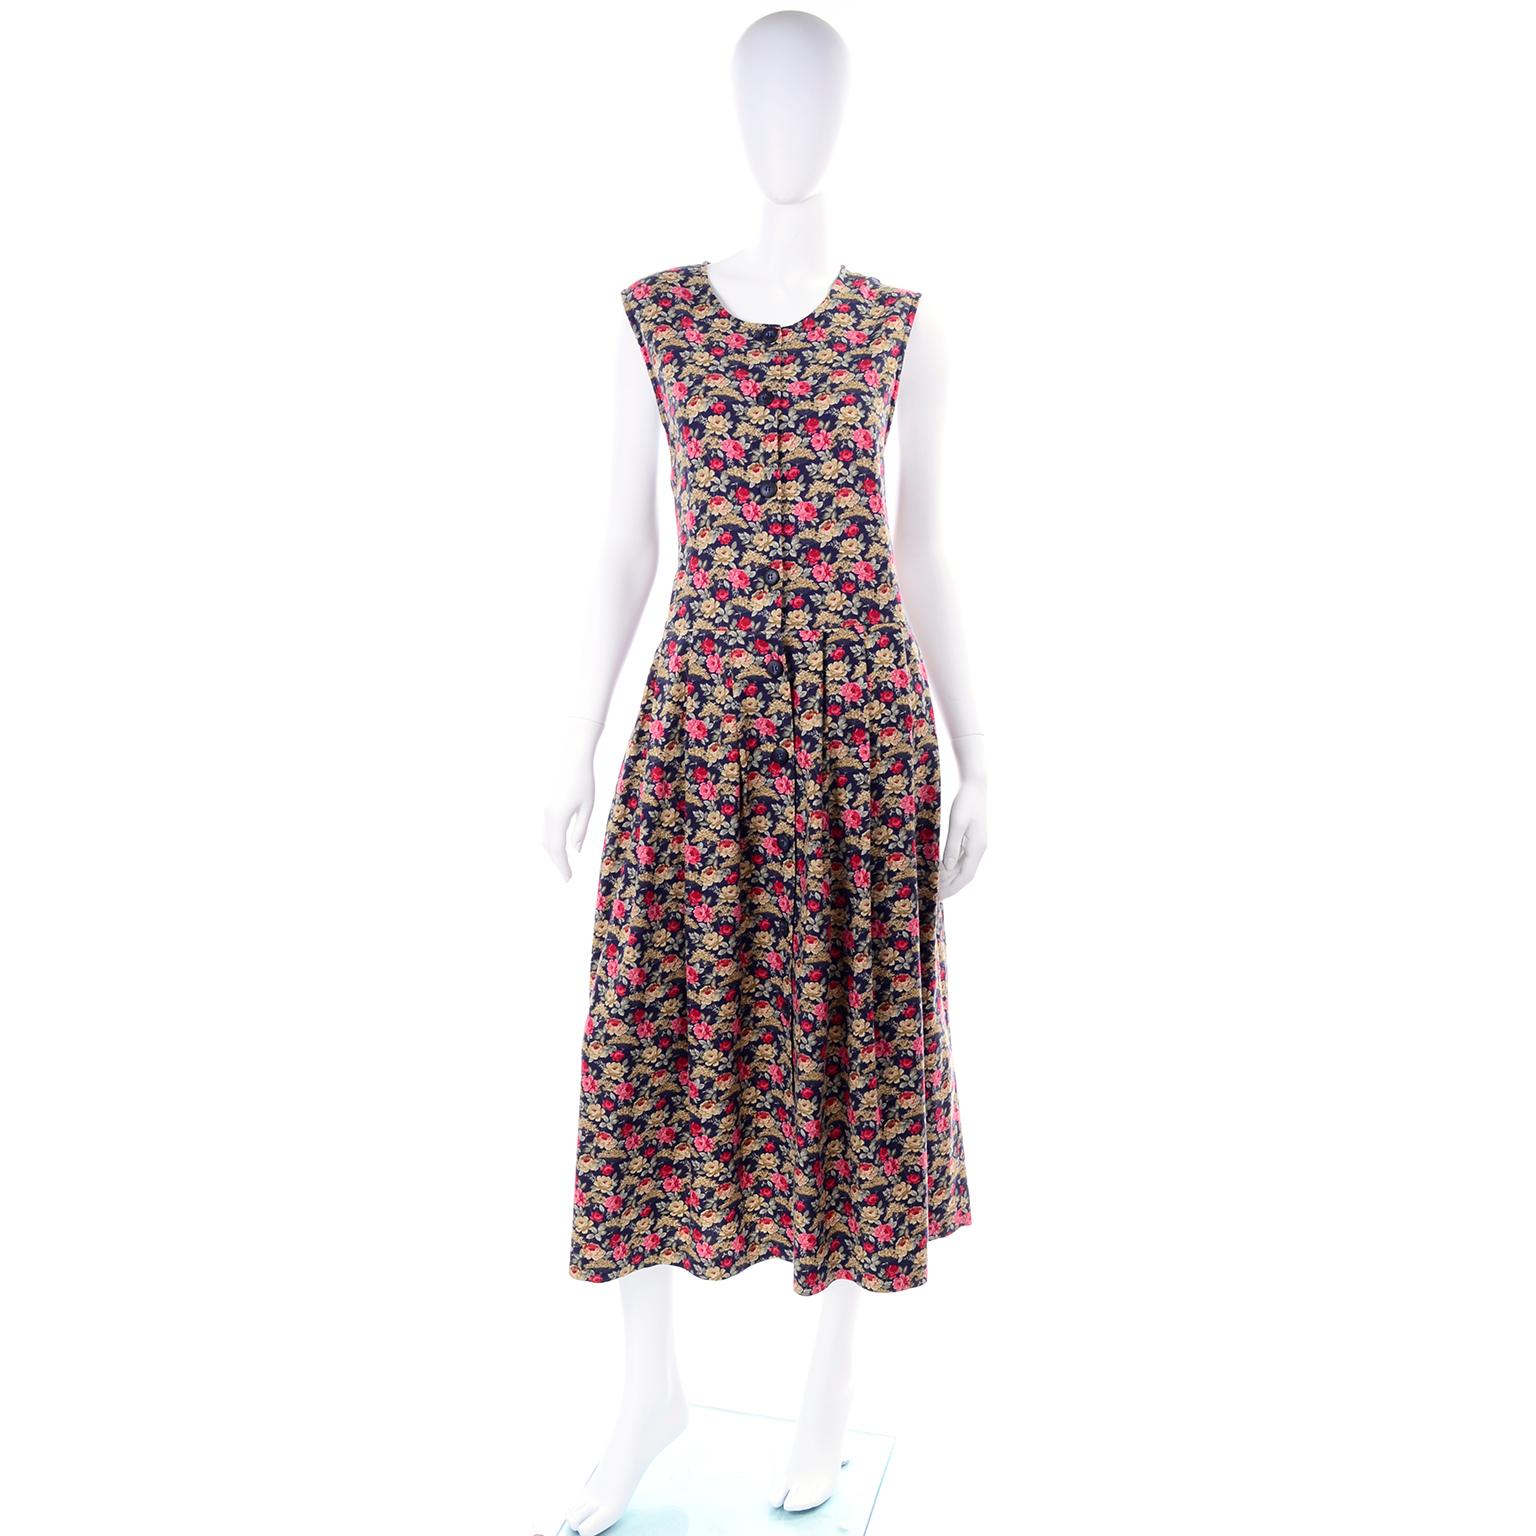 This is a pretty vintage Laura Ashley dark blue cotton dress with pink, red and mustard yellow flowers with green gray leaves.  We acquired this from an estate we handled of incredible designer clothing. The woman had only the finest pieces in her